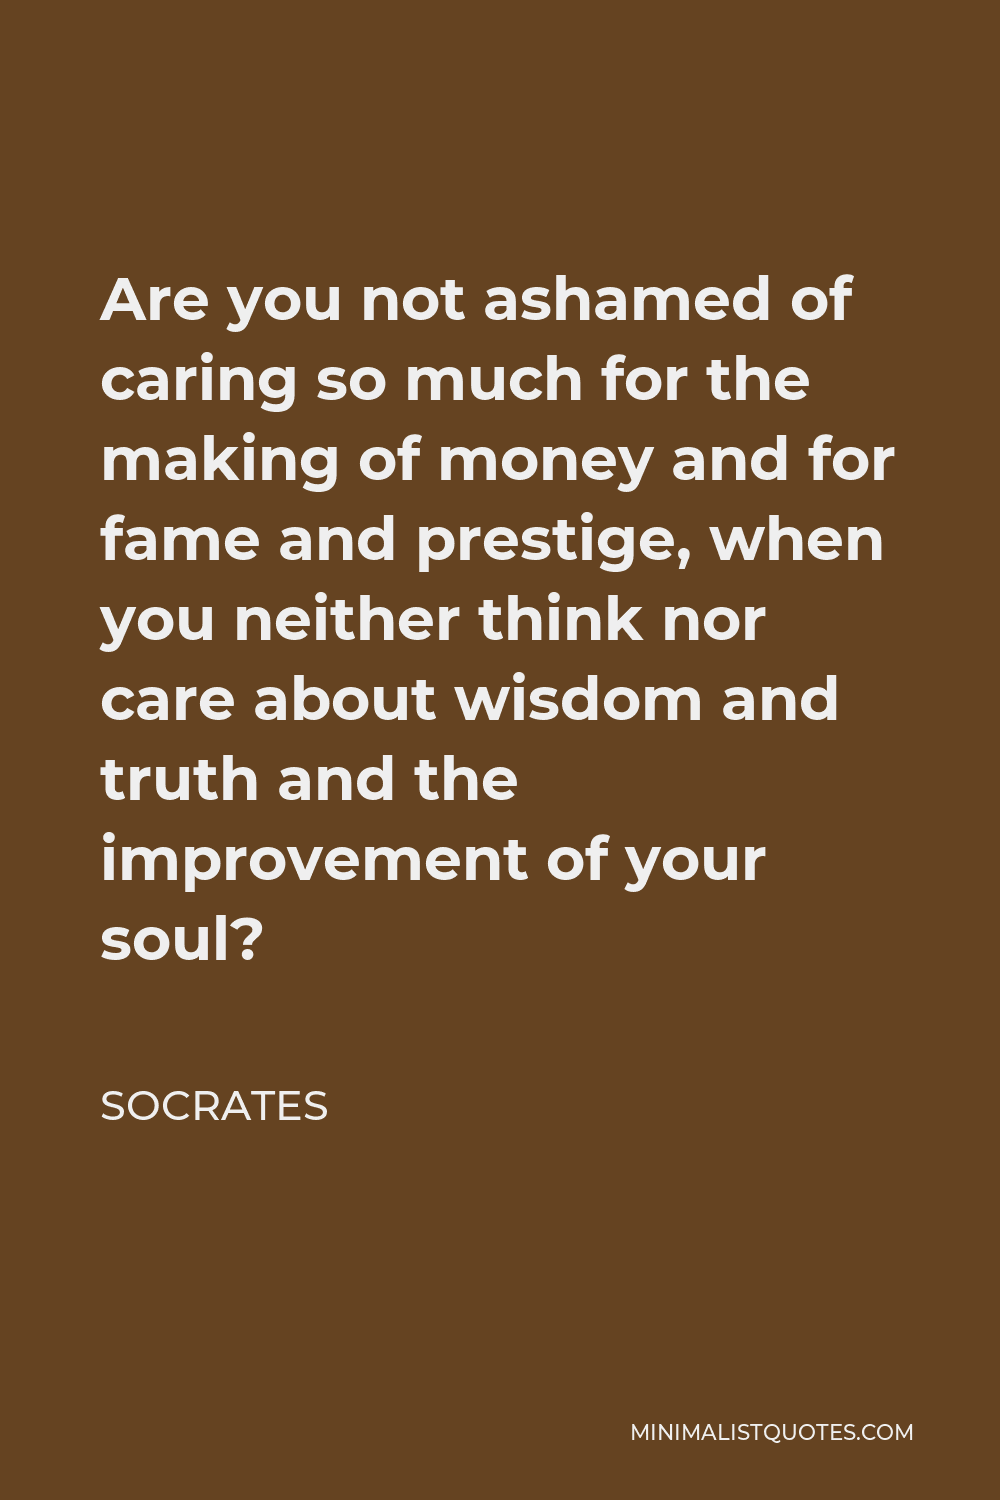 Socrates Quote - Are you not ashamed of caring so much for the making of money and for fame and prestige, when you neither think nor care about wisdom and truth and the improvement of your soul?